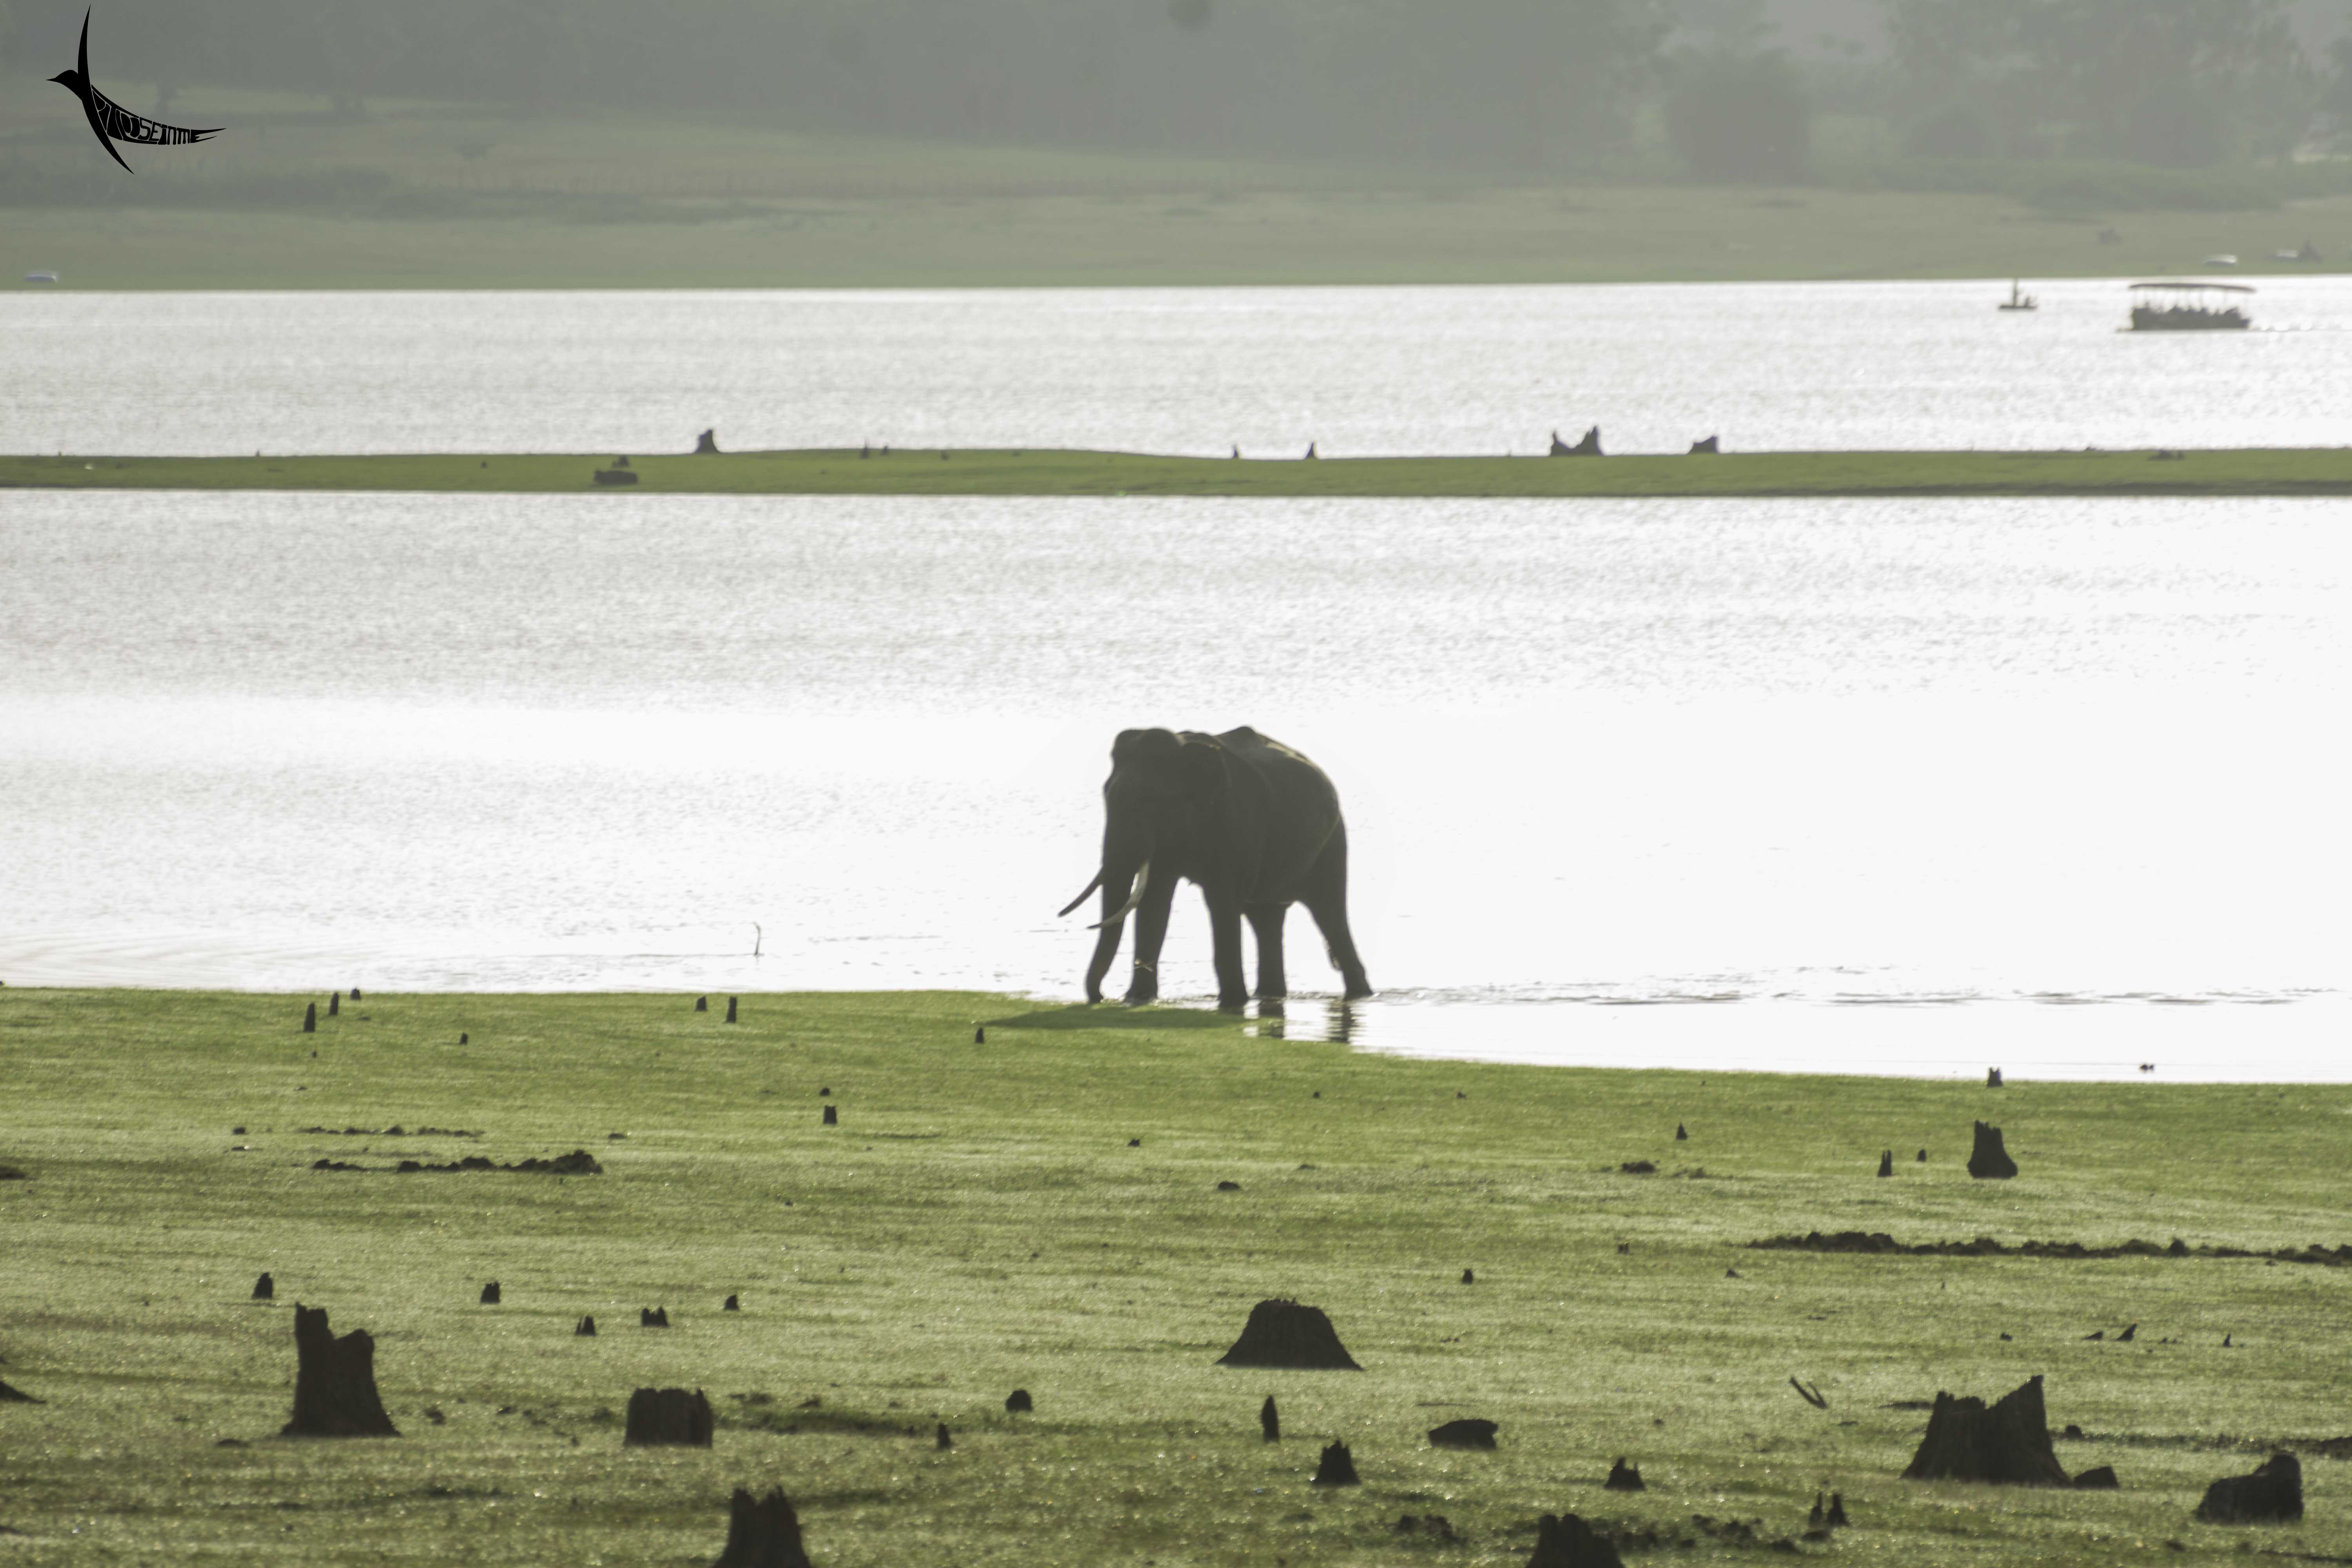 The Tusker coming out of the water